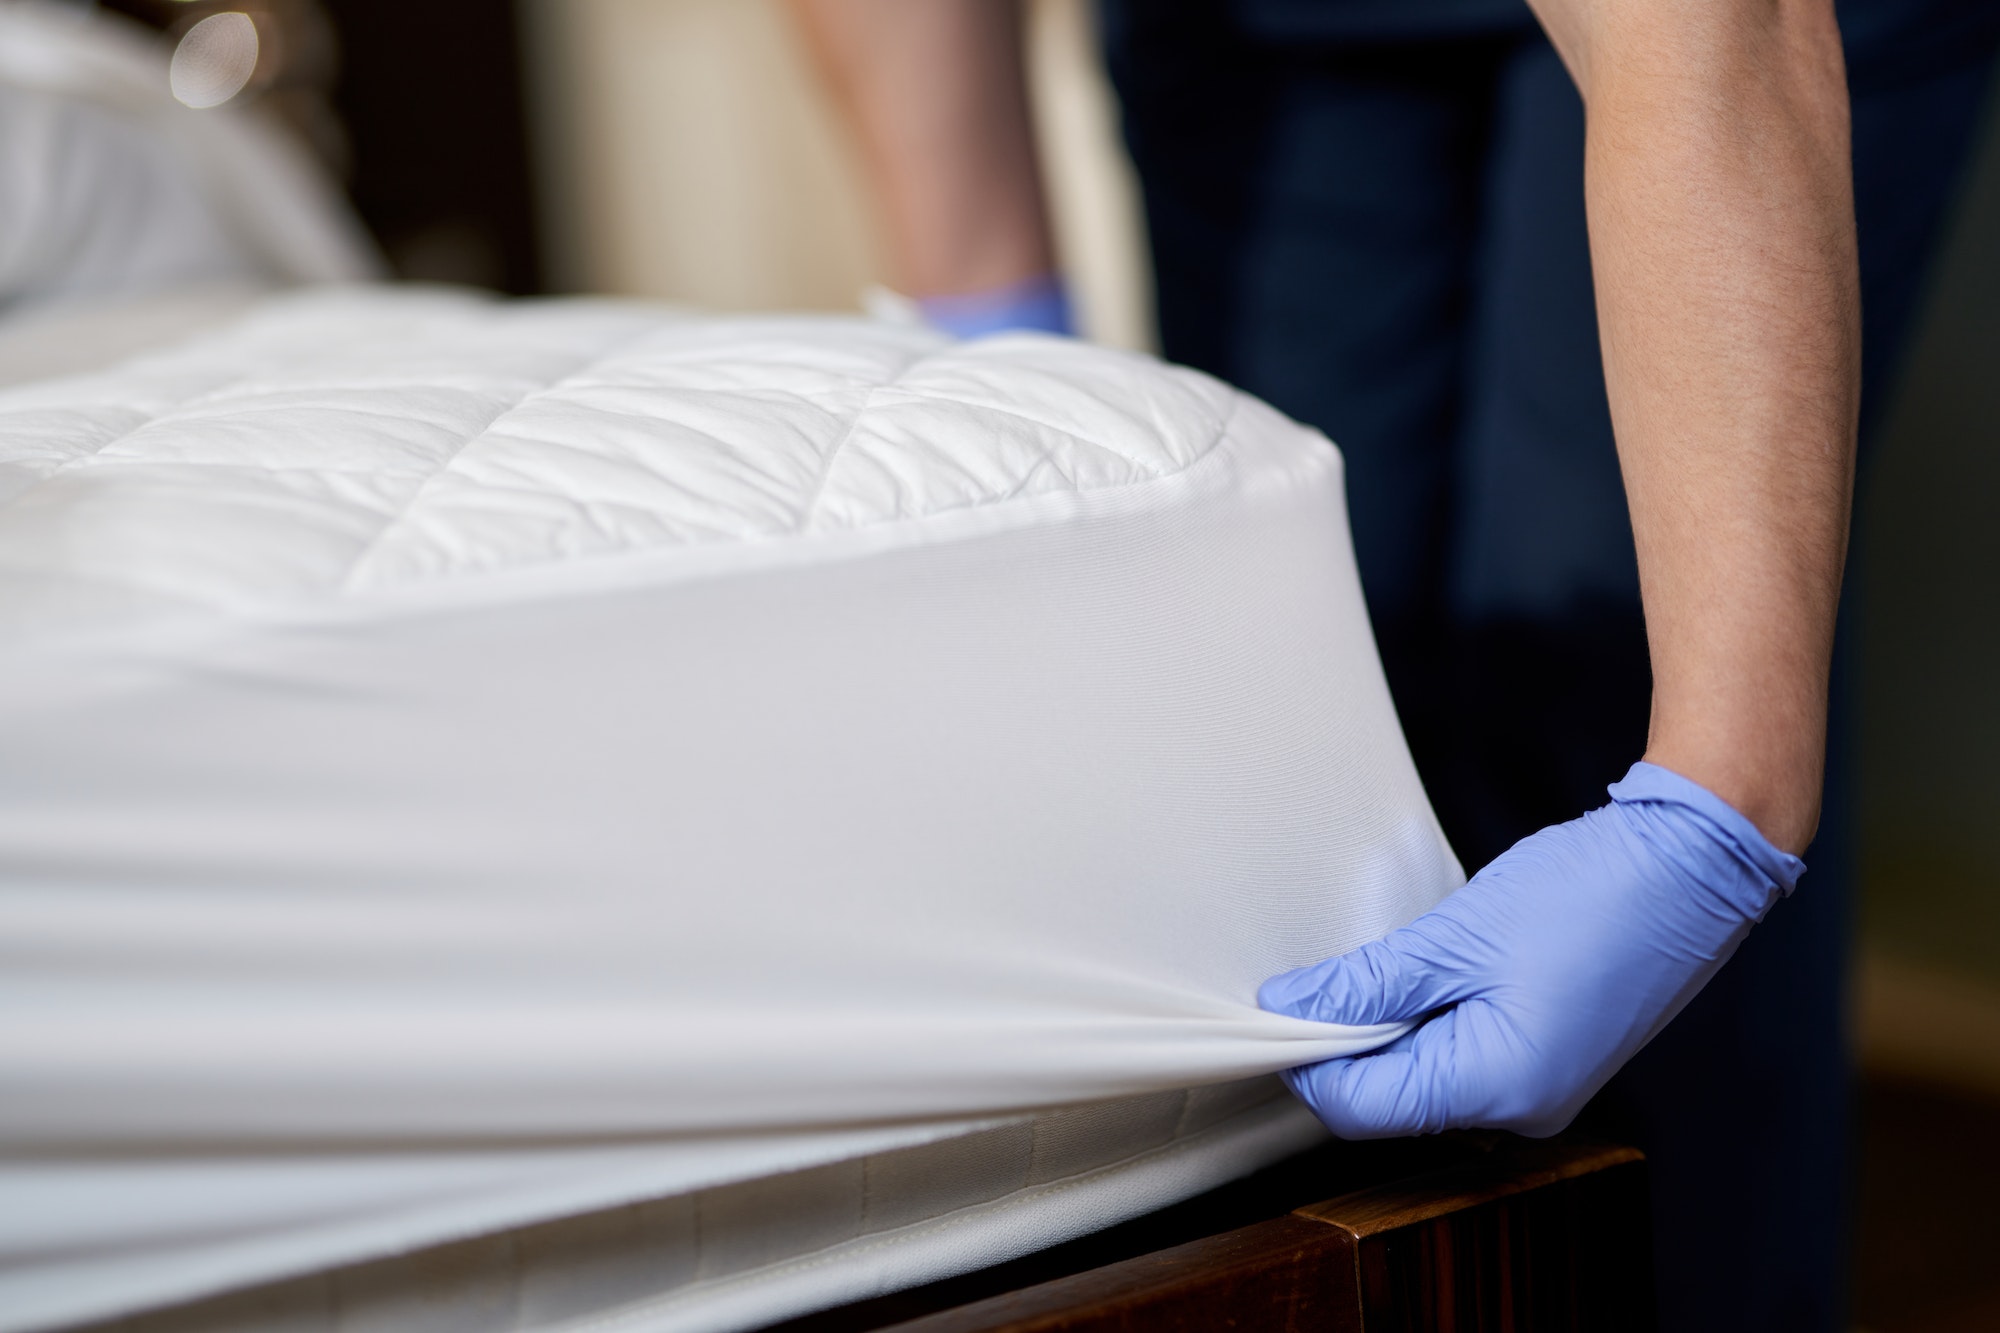 Housekeeper in gloves changing bedding in hotel room